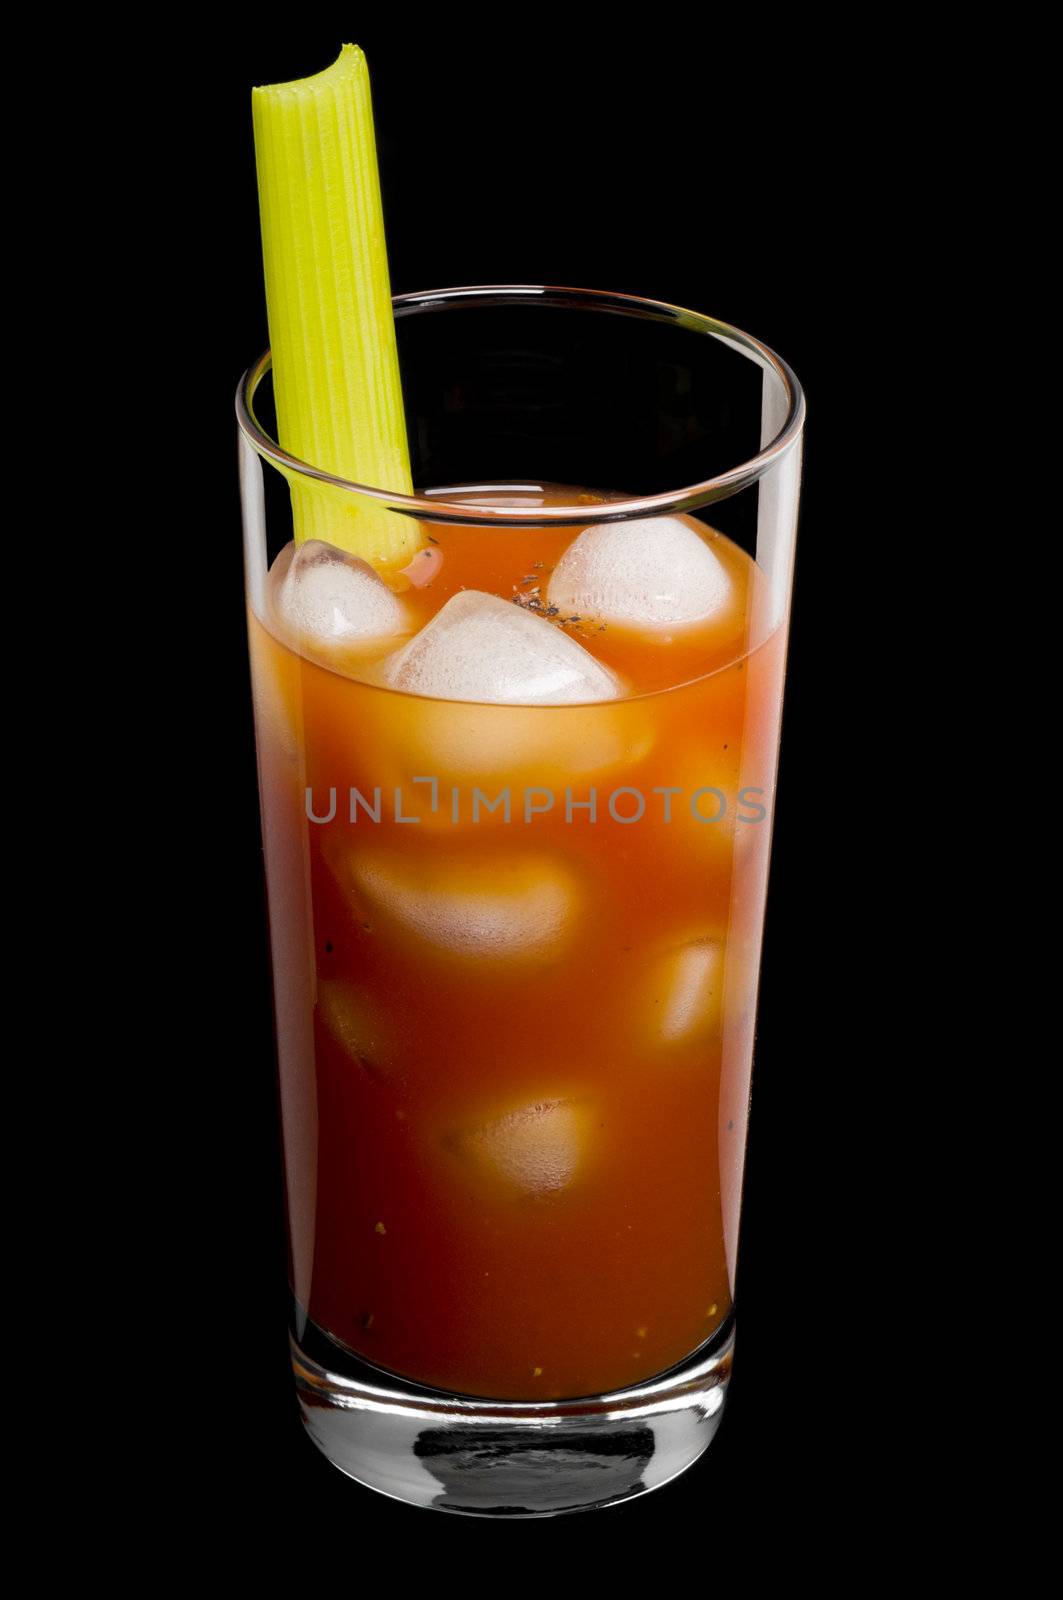 Bloody mary cocktail over a black background